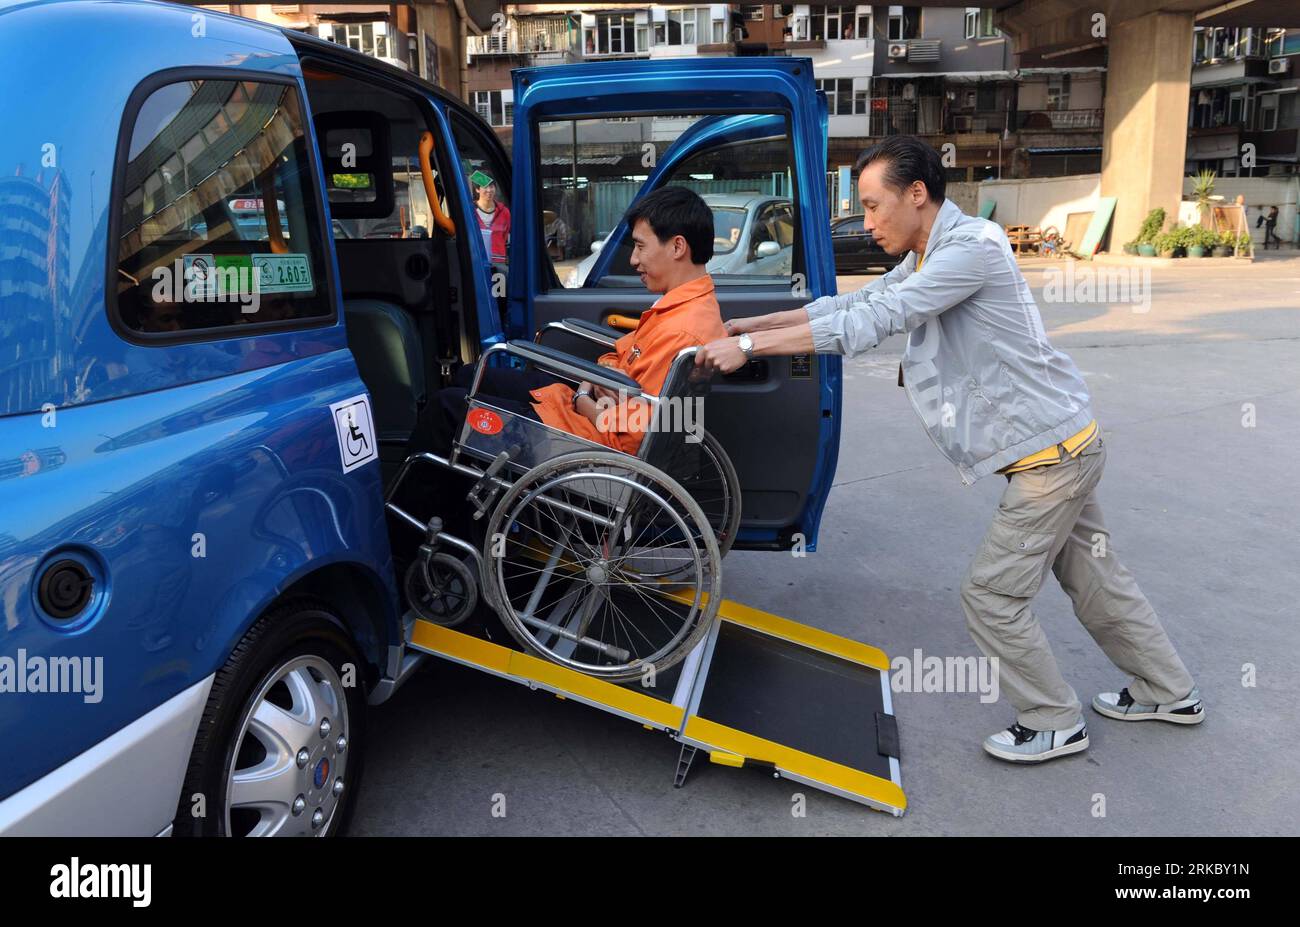 Bildnummer: 54625404  Datum: 09.11.2010  Copyright: imago/Xinhua (101109) -- GUANGZHOU, Nov. 9, 2010 (Xinhua) -- An employee in wheelchair is helped onto a barrier-free taxi by foldable steel board at Baiyun Taxi Service Company in Guangzhou, south China s Guangdong Province, Nov. 9, 2010. A total of 100 barrier-free taxis are put on road to serve disabled during the the 16th Asian Games. (Xinhua/Yang Shiyao) CHINA-GUANGZHOU-ASIAN GAMES-BARRIER-FREE TAXI PUBLICATIONxNOTxINxCHN Gesellschaft Behindertengerecht Taxi barrierefrei Rollstuhltaxi Behindertentaxi kbdig xsp 2010 quer     Bildnummer 546 Stock Photo